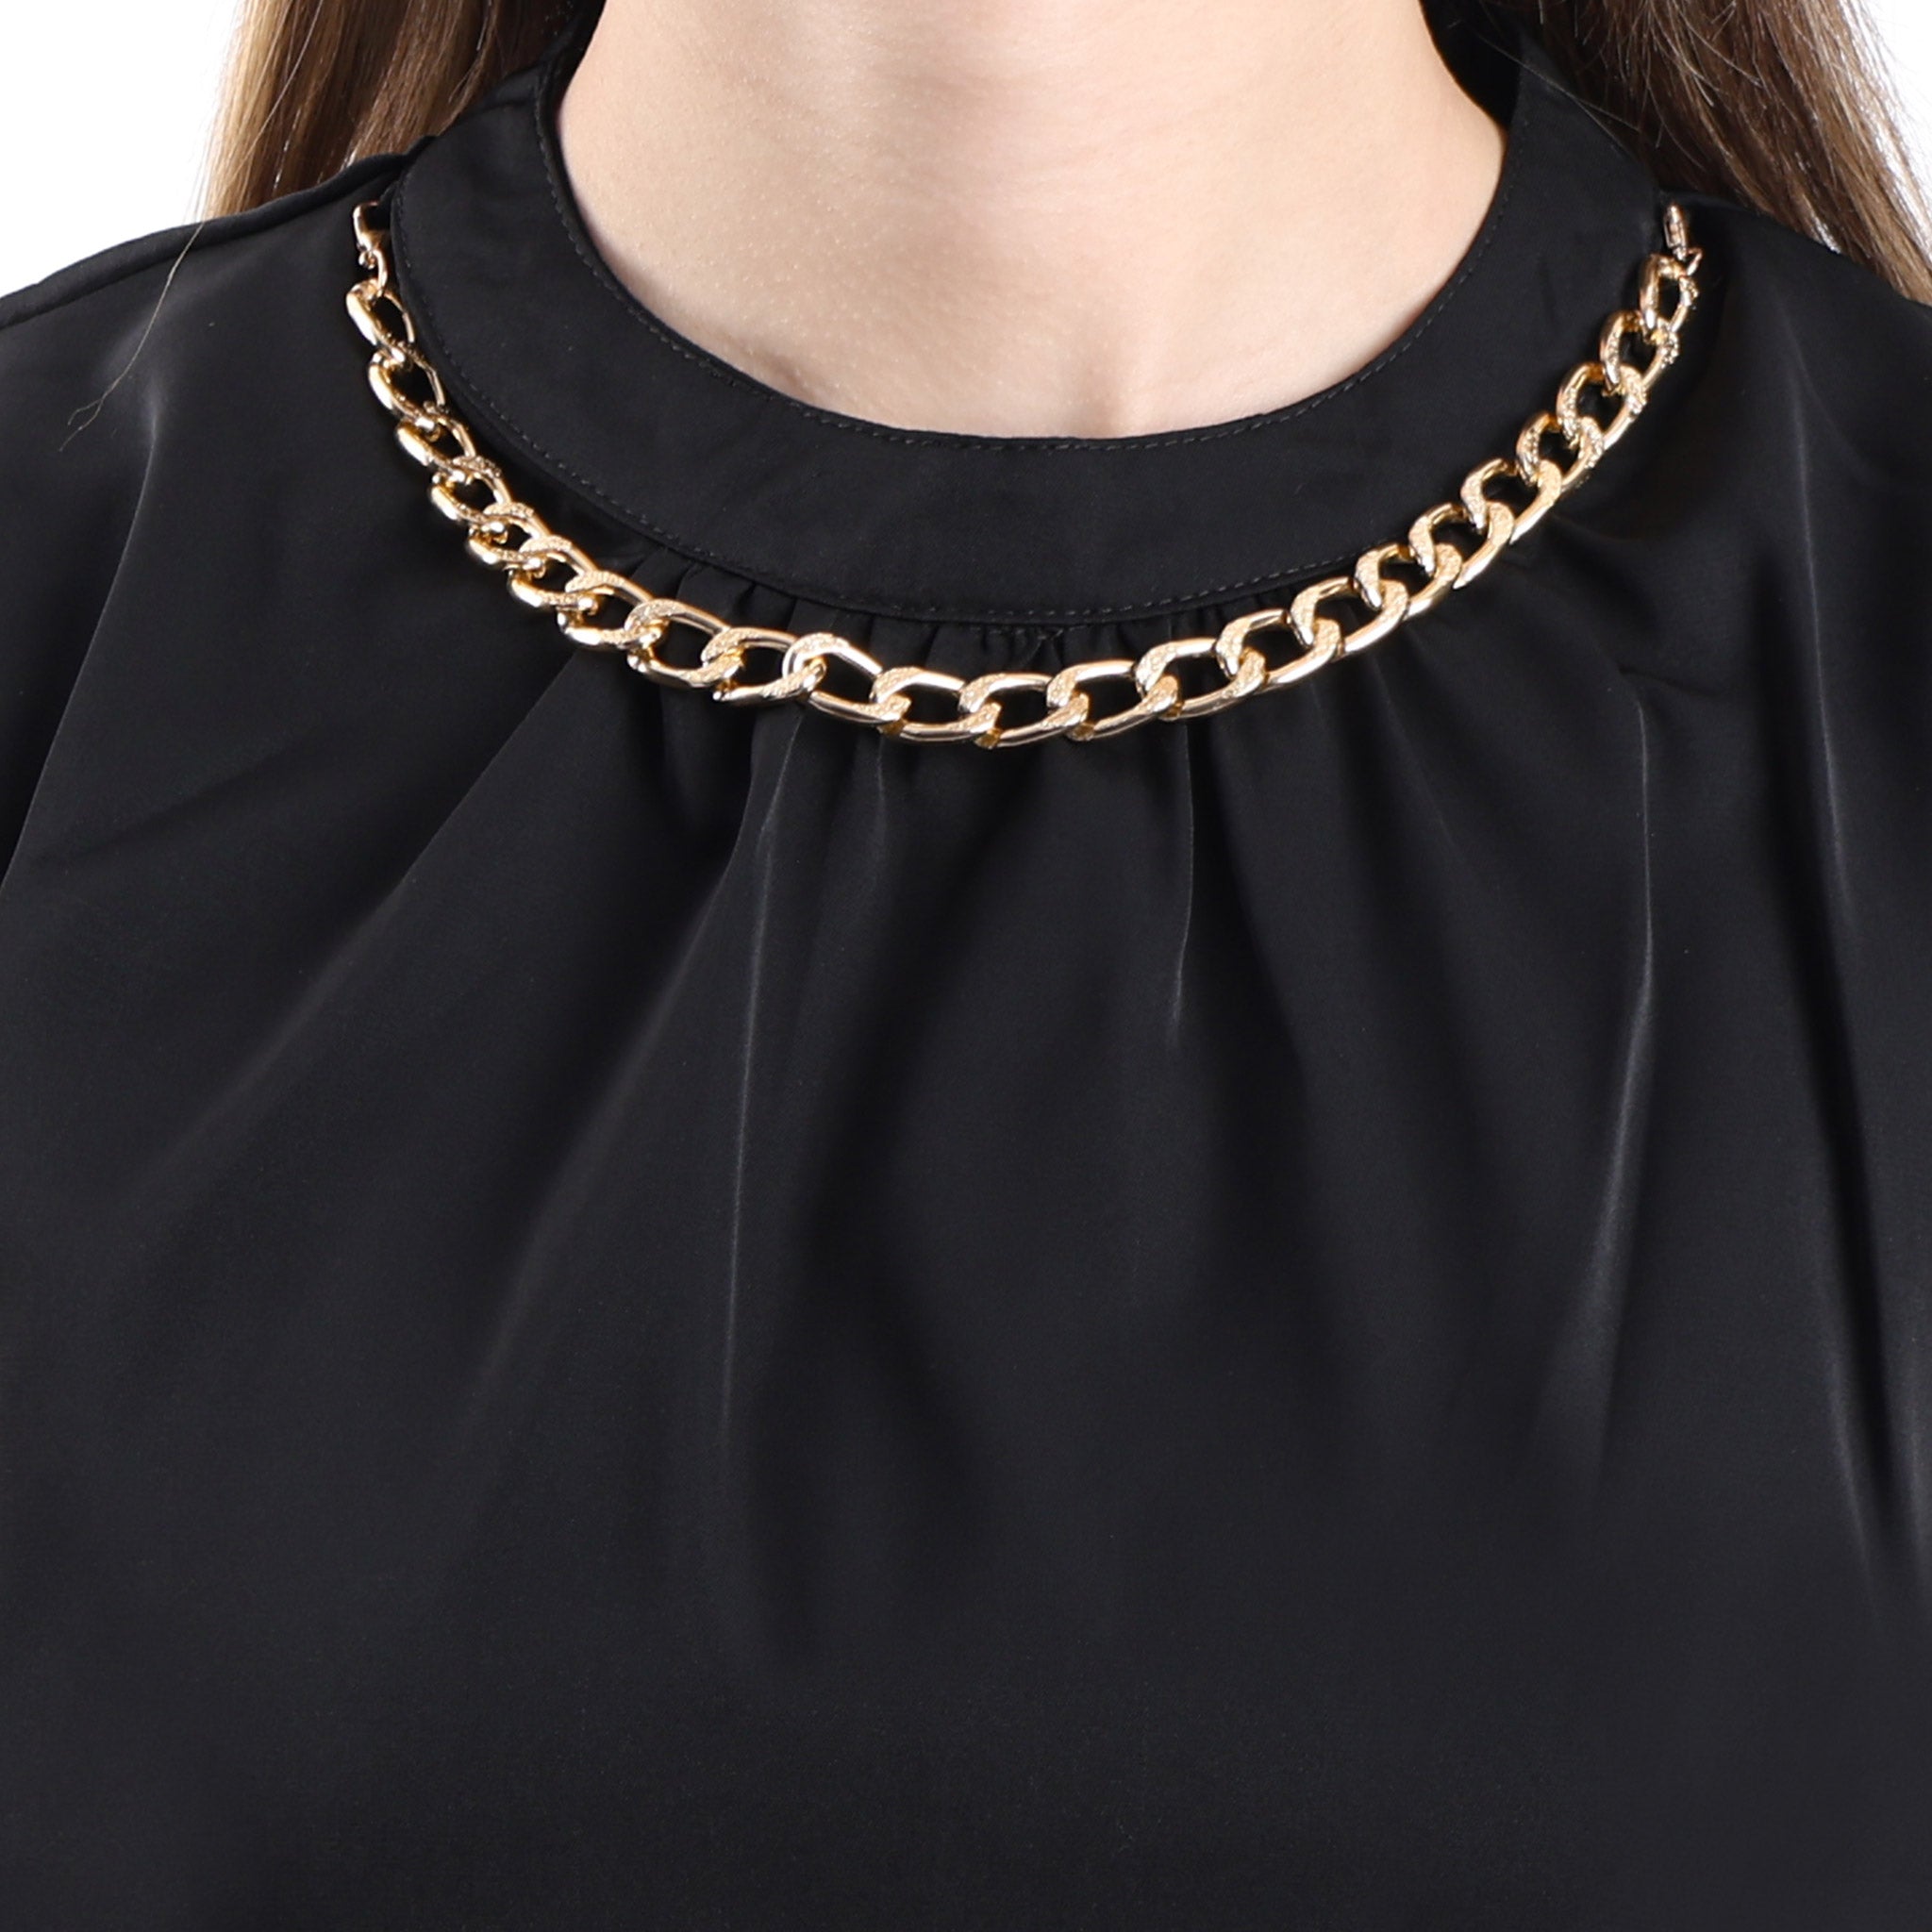 Satin Cut Blouse with Chain